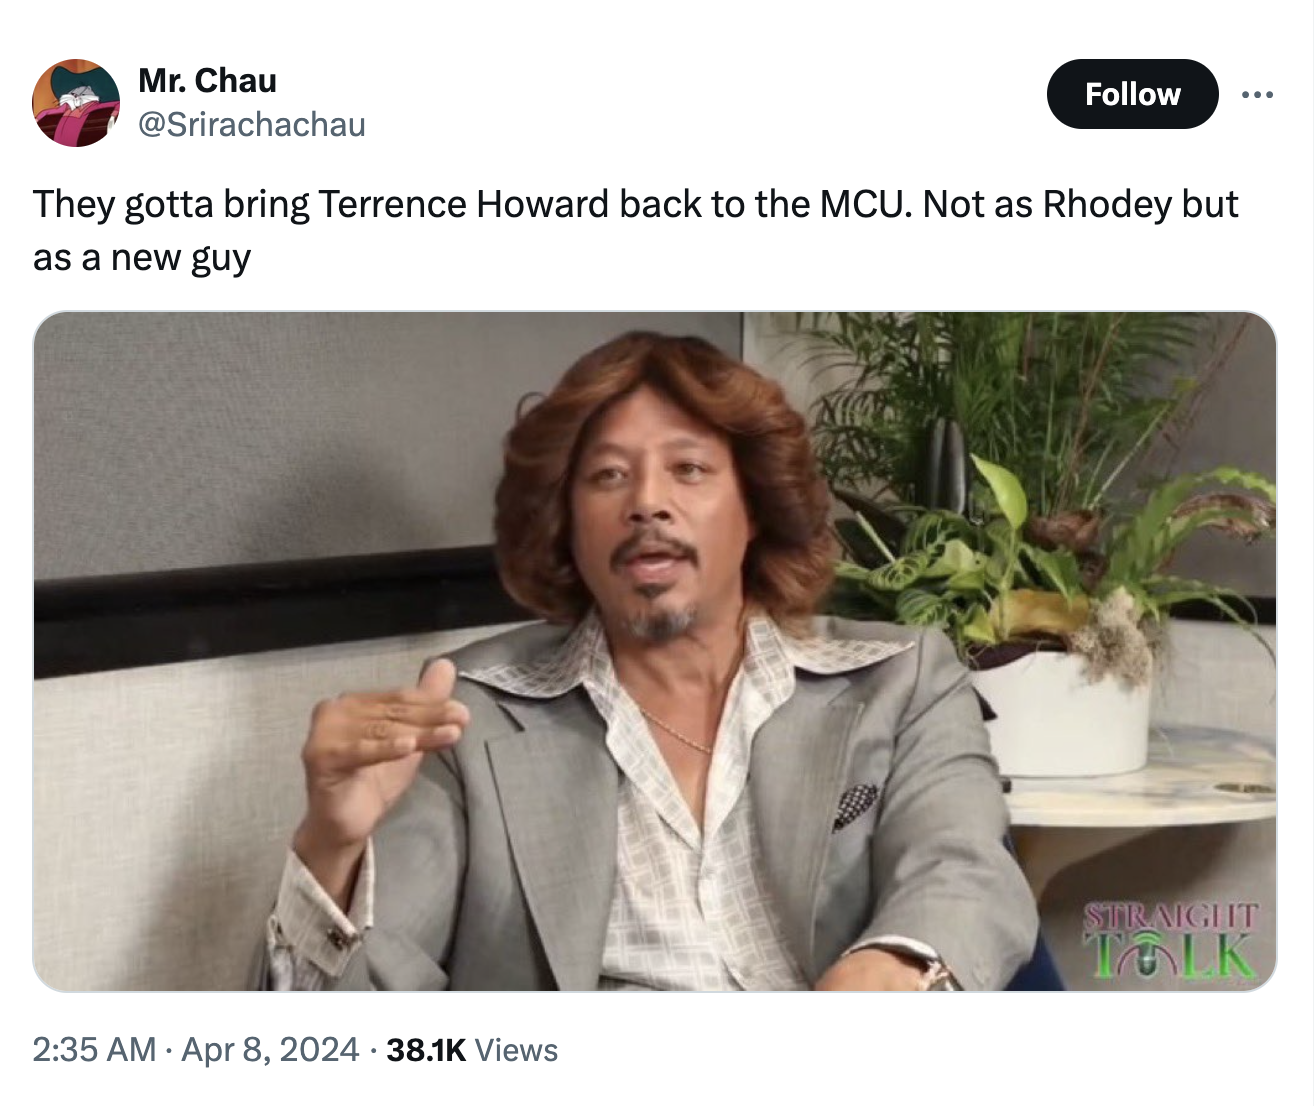 photo caption - Mr. Chau They gotta bring Terrence Howard back to the Mcu. Not as Rhodey but as a new guy Straight Talk Views